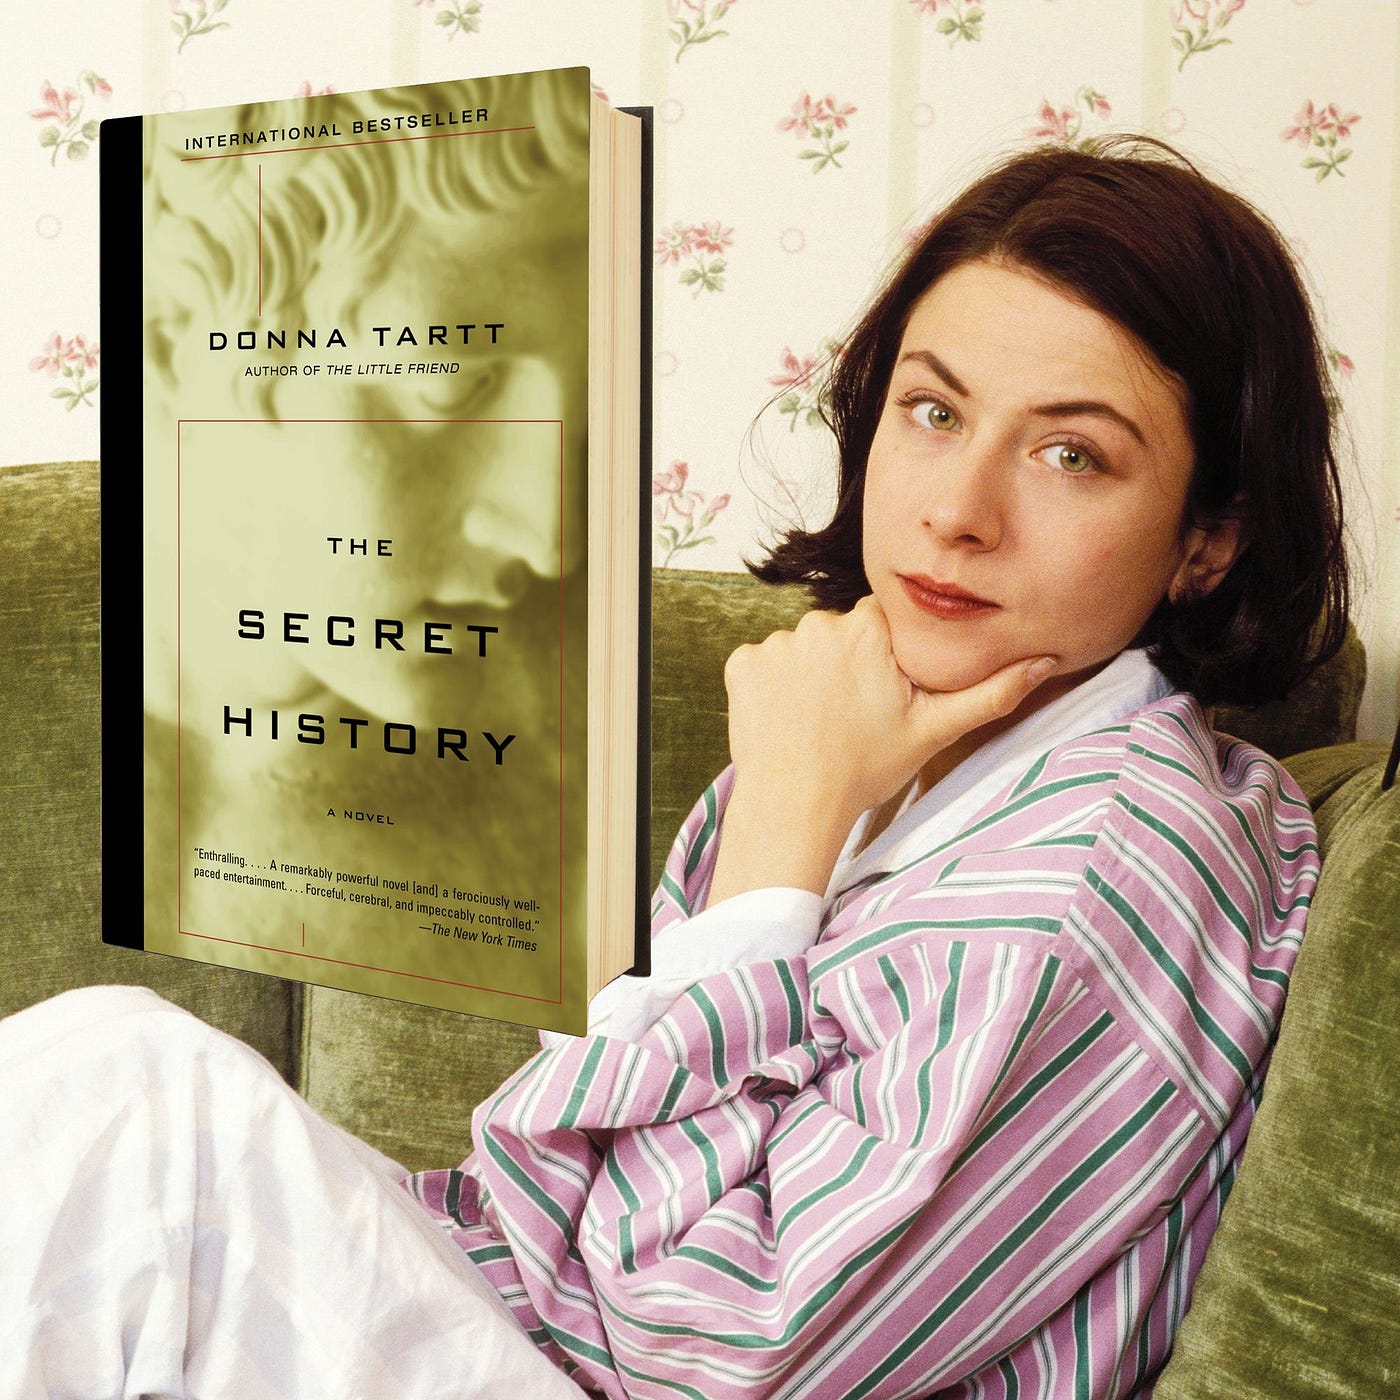 Donna Tartt lying on a couch and her book, “The Secret History”